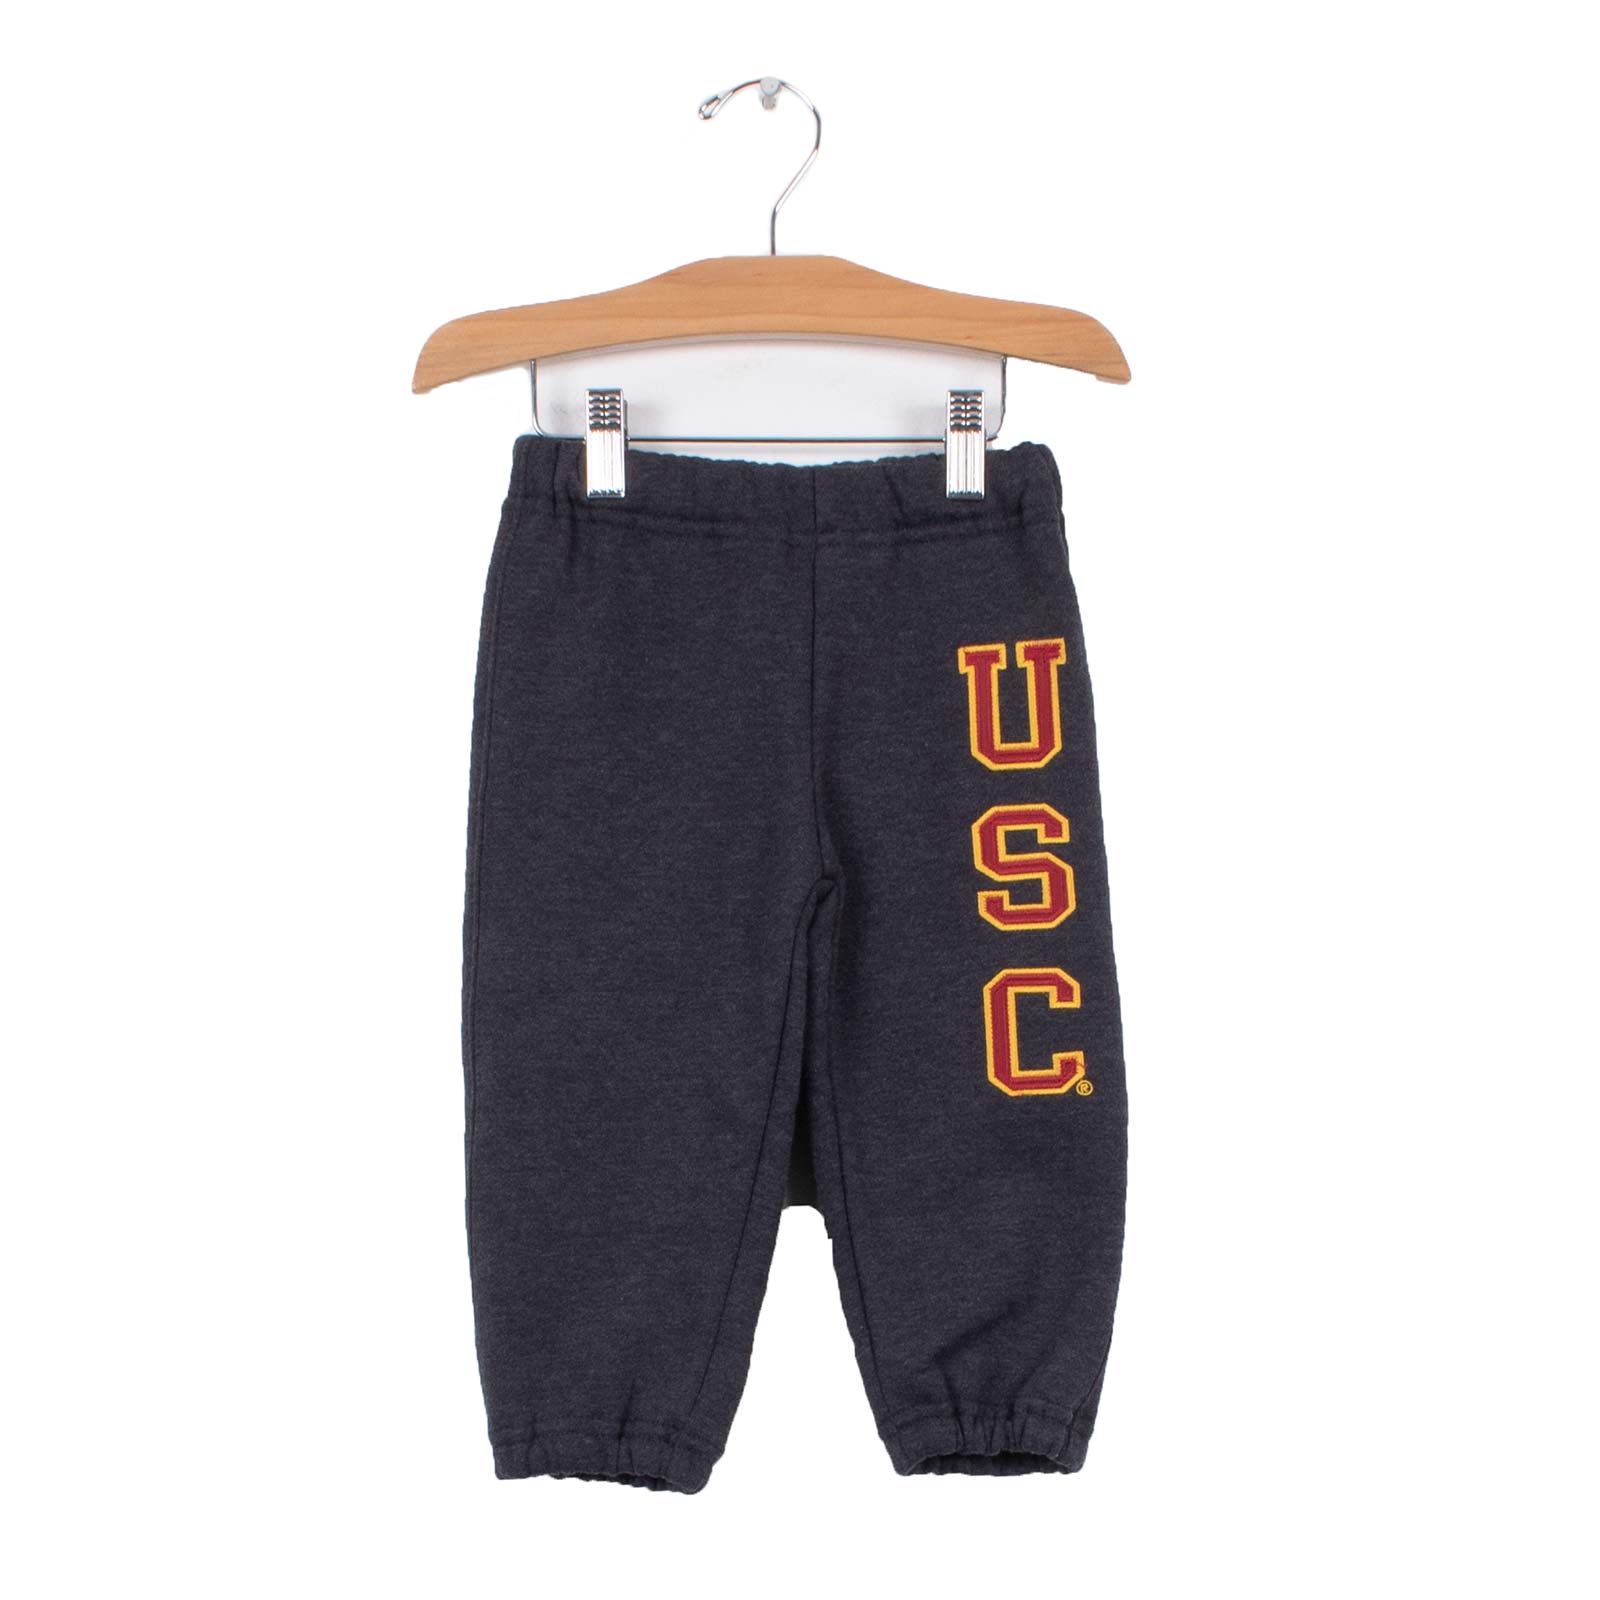 USC Arch Toddler TT Pant Oxford image11